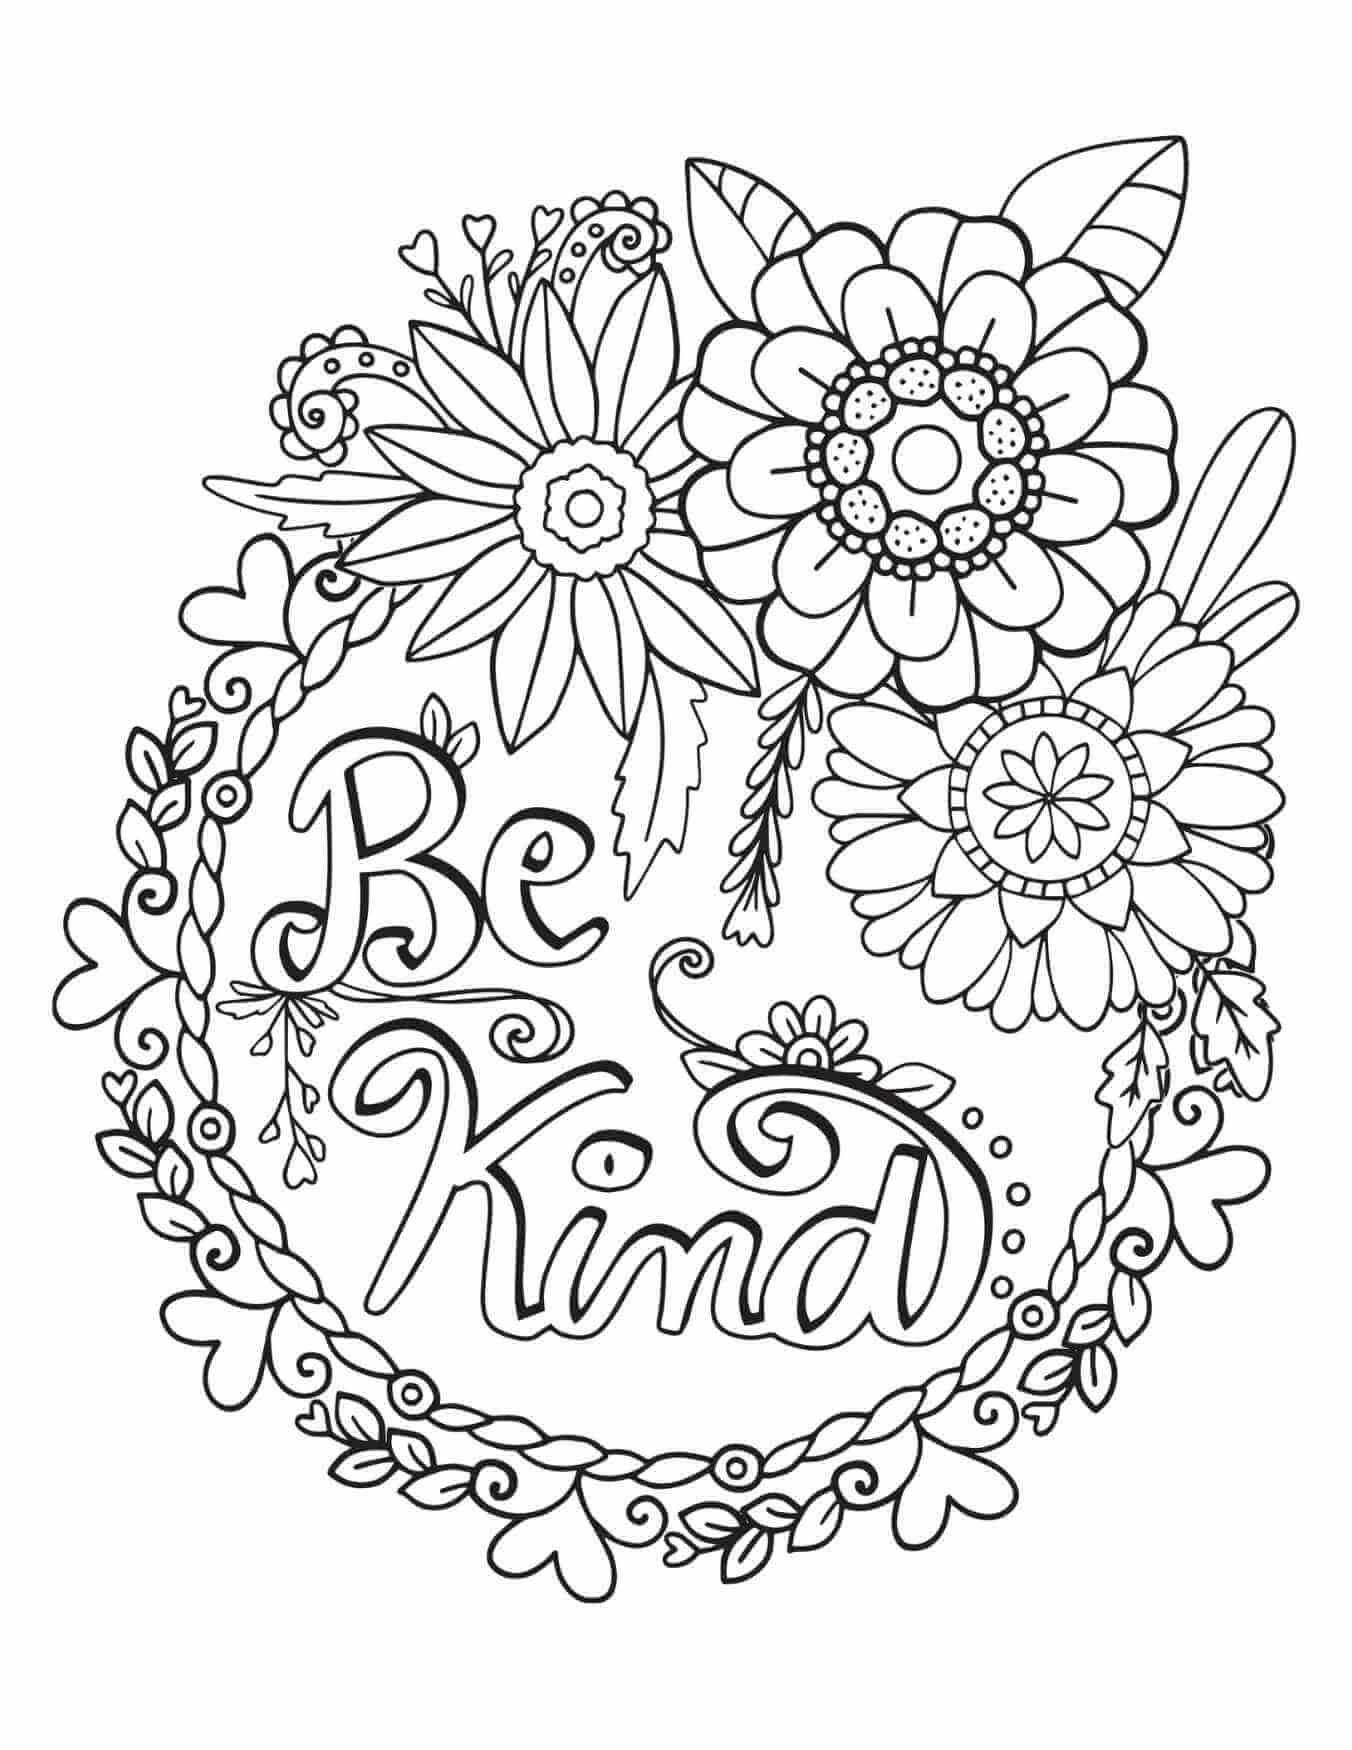 20 Free Kindness Coloring Pages